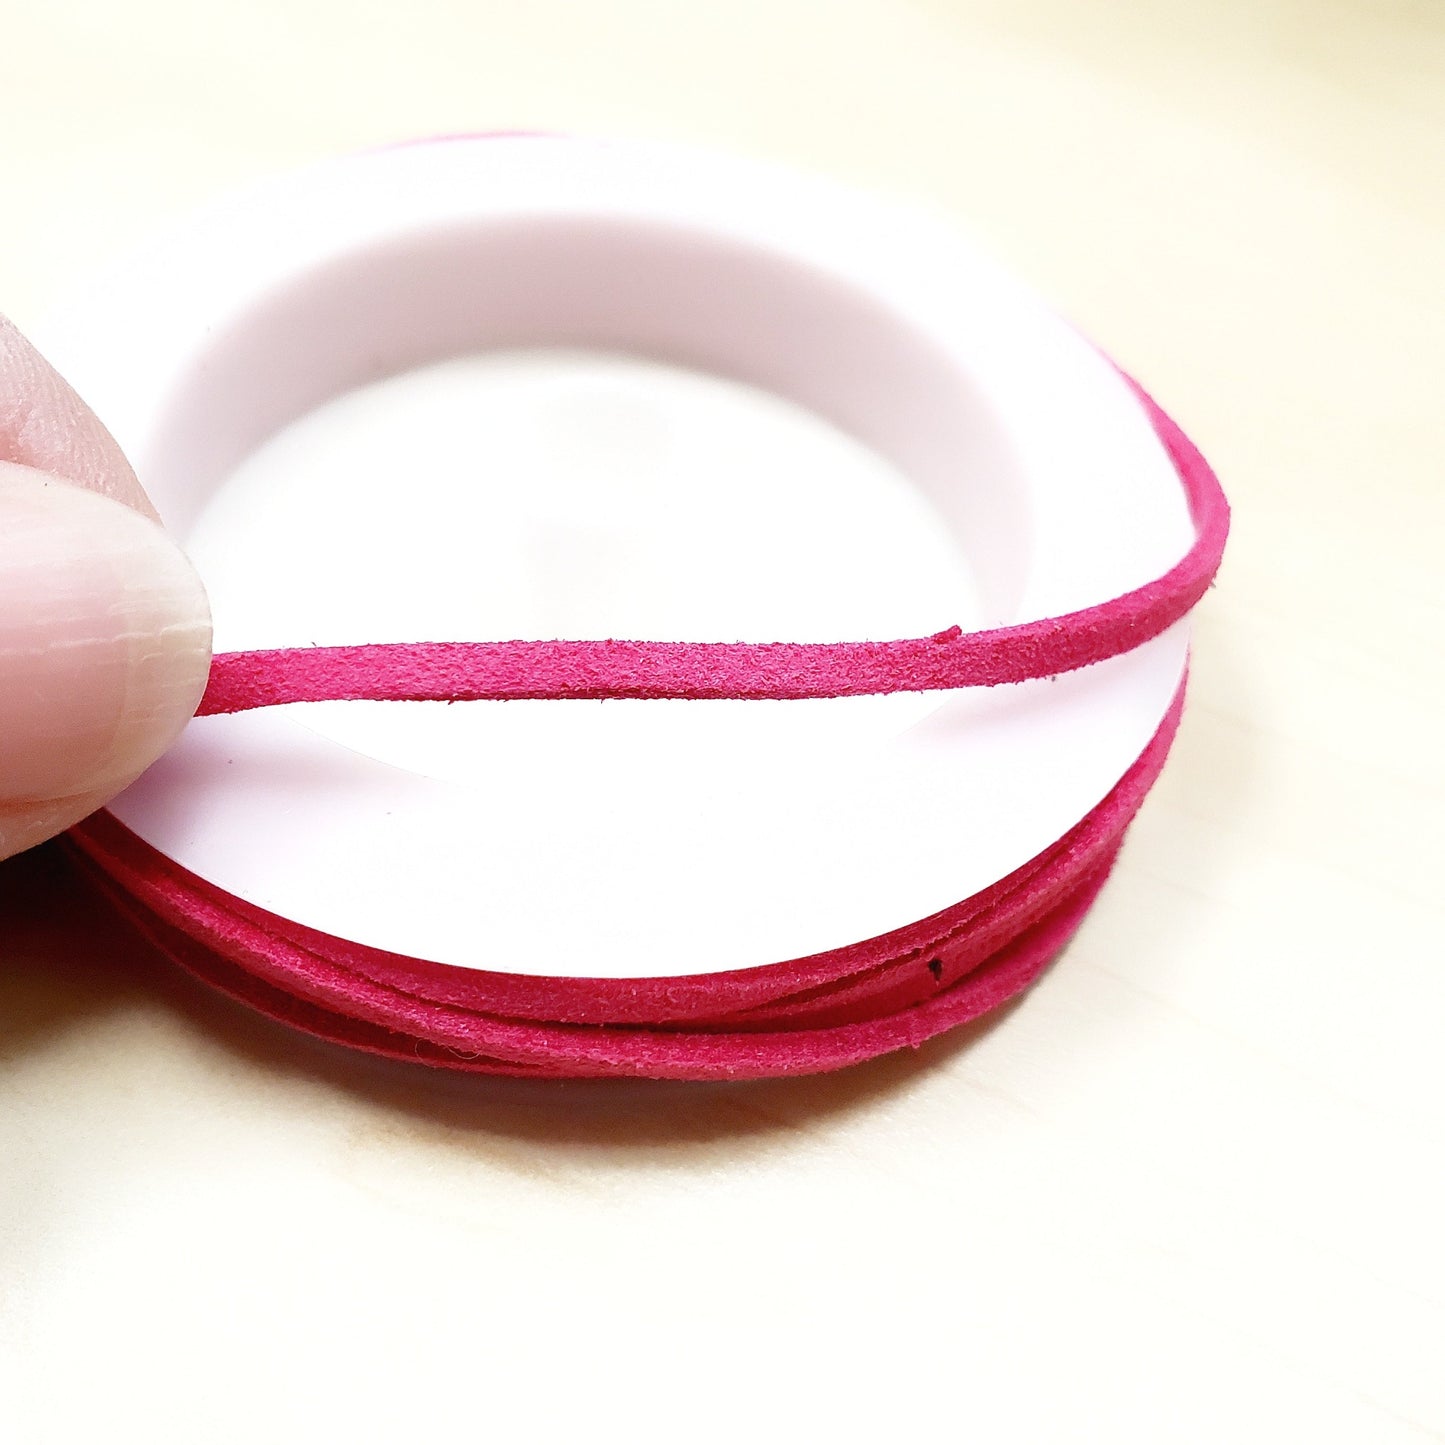 fingers holding a string of pink faux-suede coming from a white bobbin